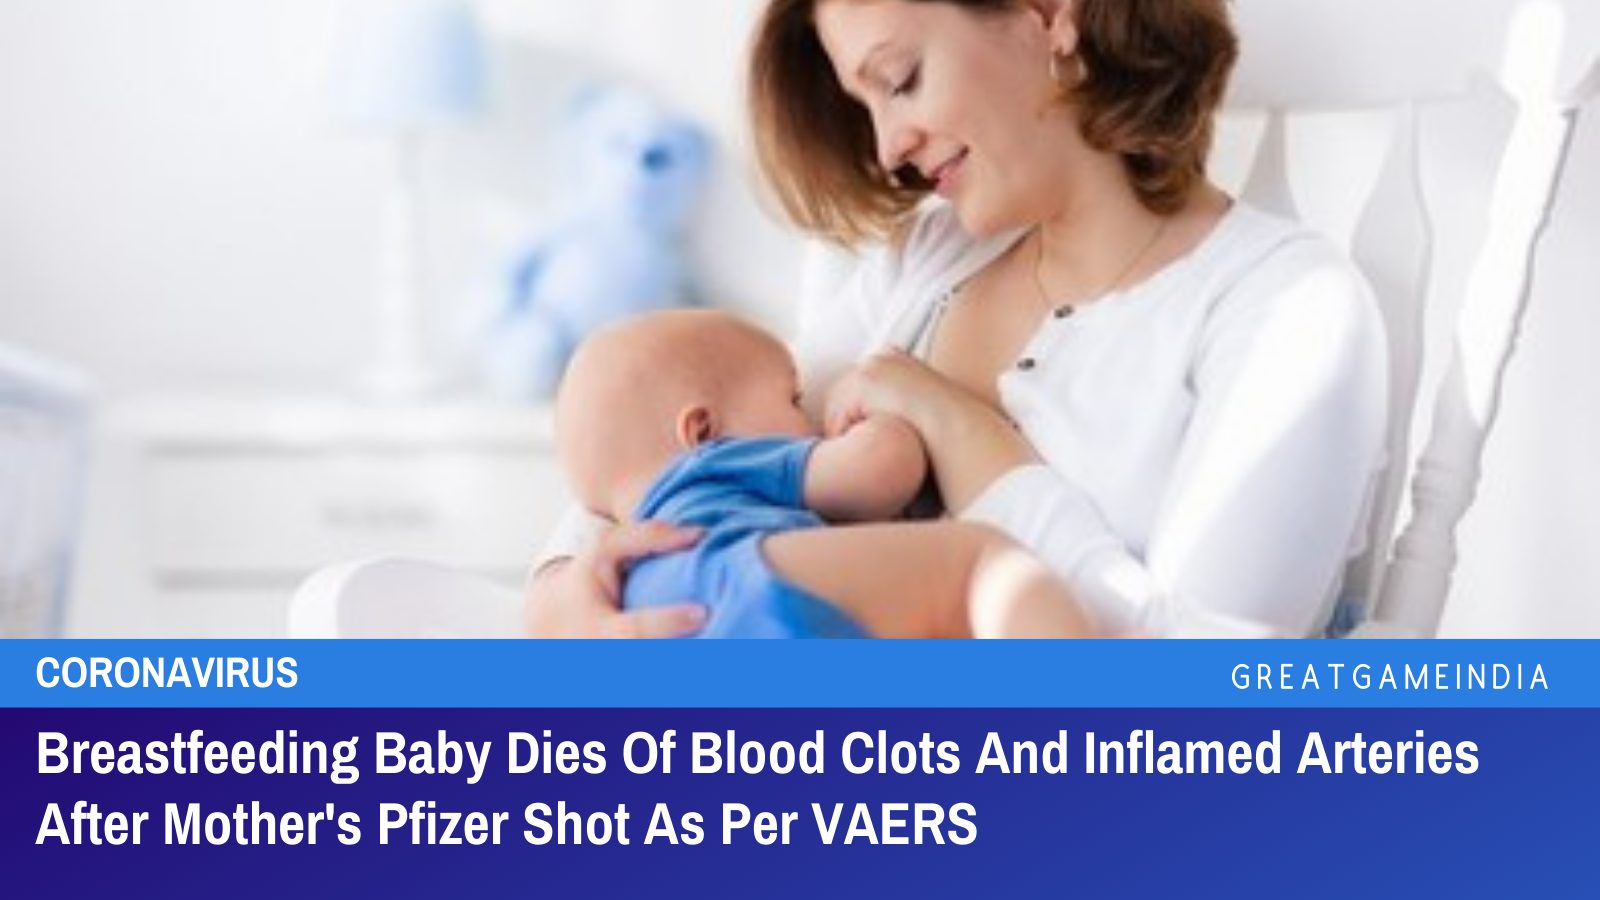 Second Breastfeeding Baby Dies Of Blood Clots And Inflamed Arteries After Mother’s Pfizer Shot As Per VAERS